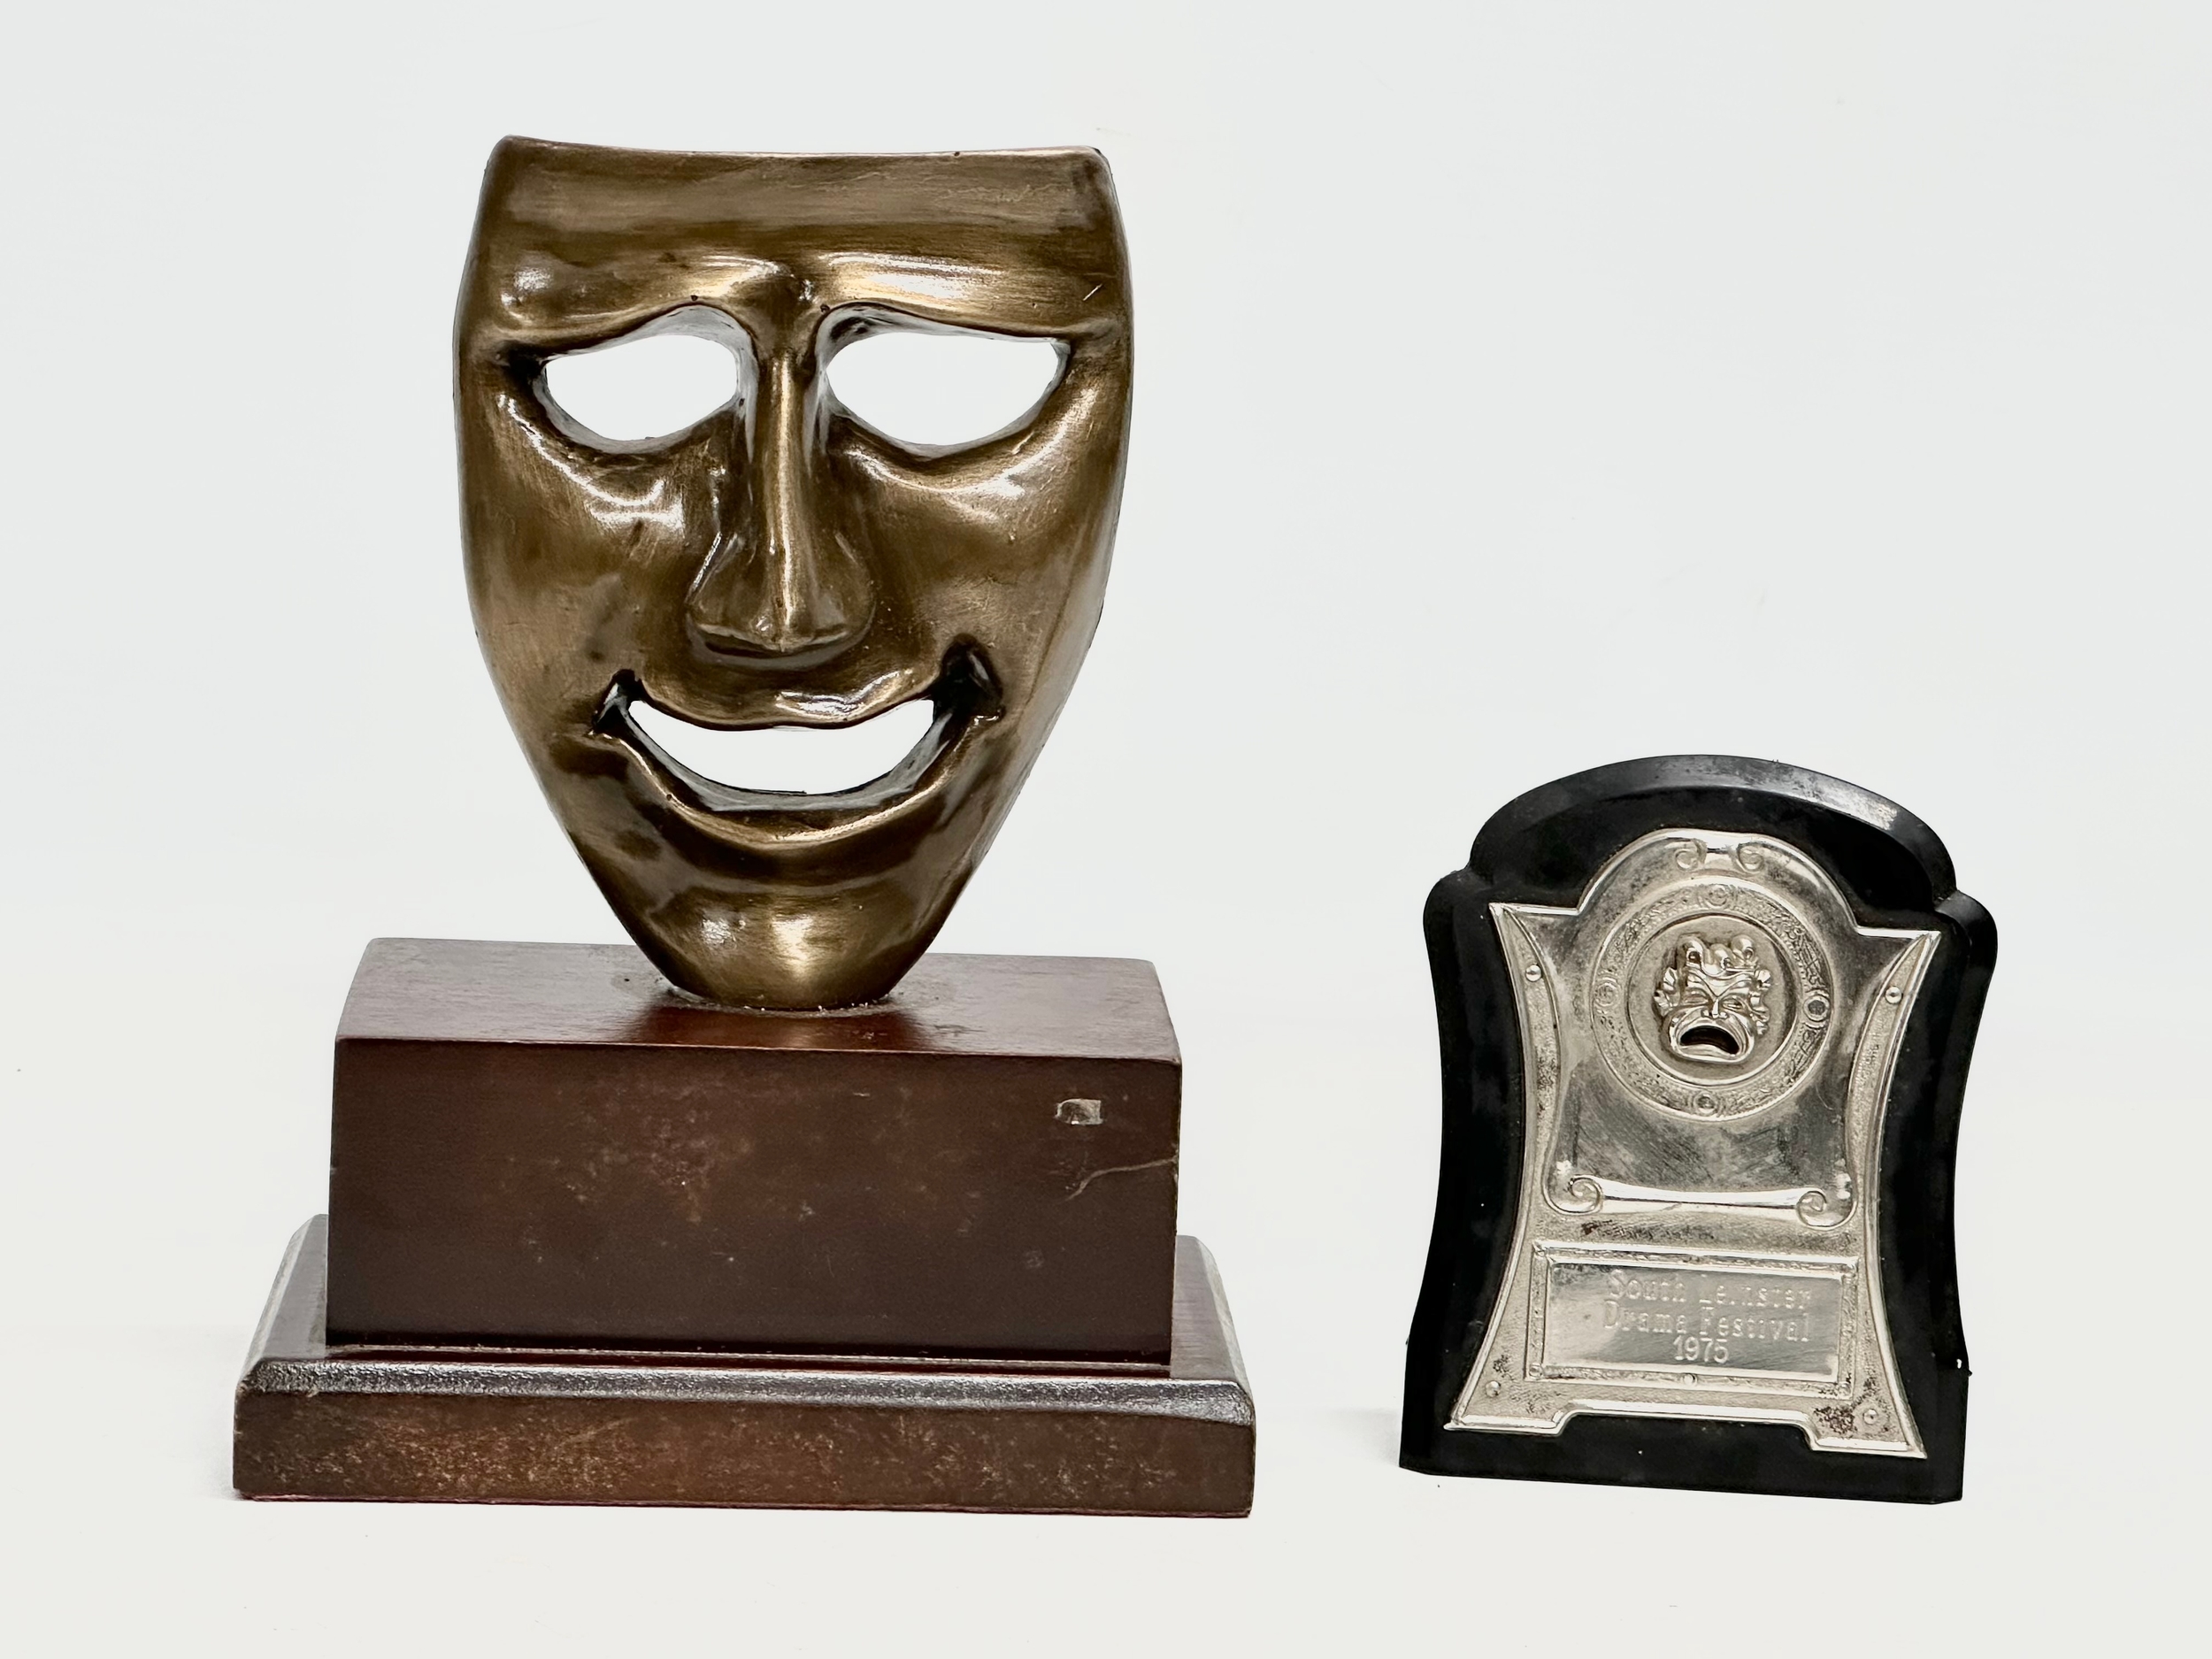 A South Leinster Drama Festival 1975 with a Tragedy Drama Mask on wooden stand. 15x9.5x20